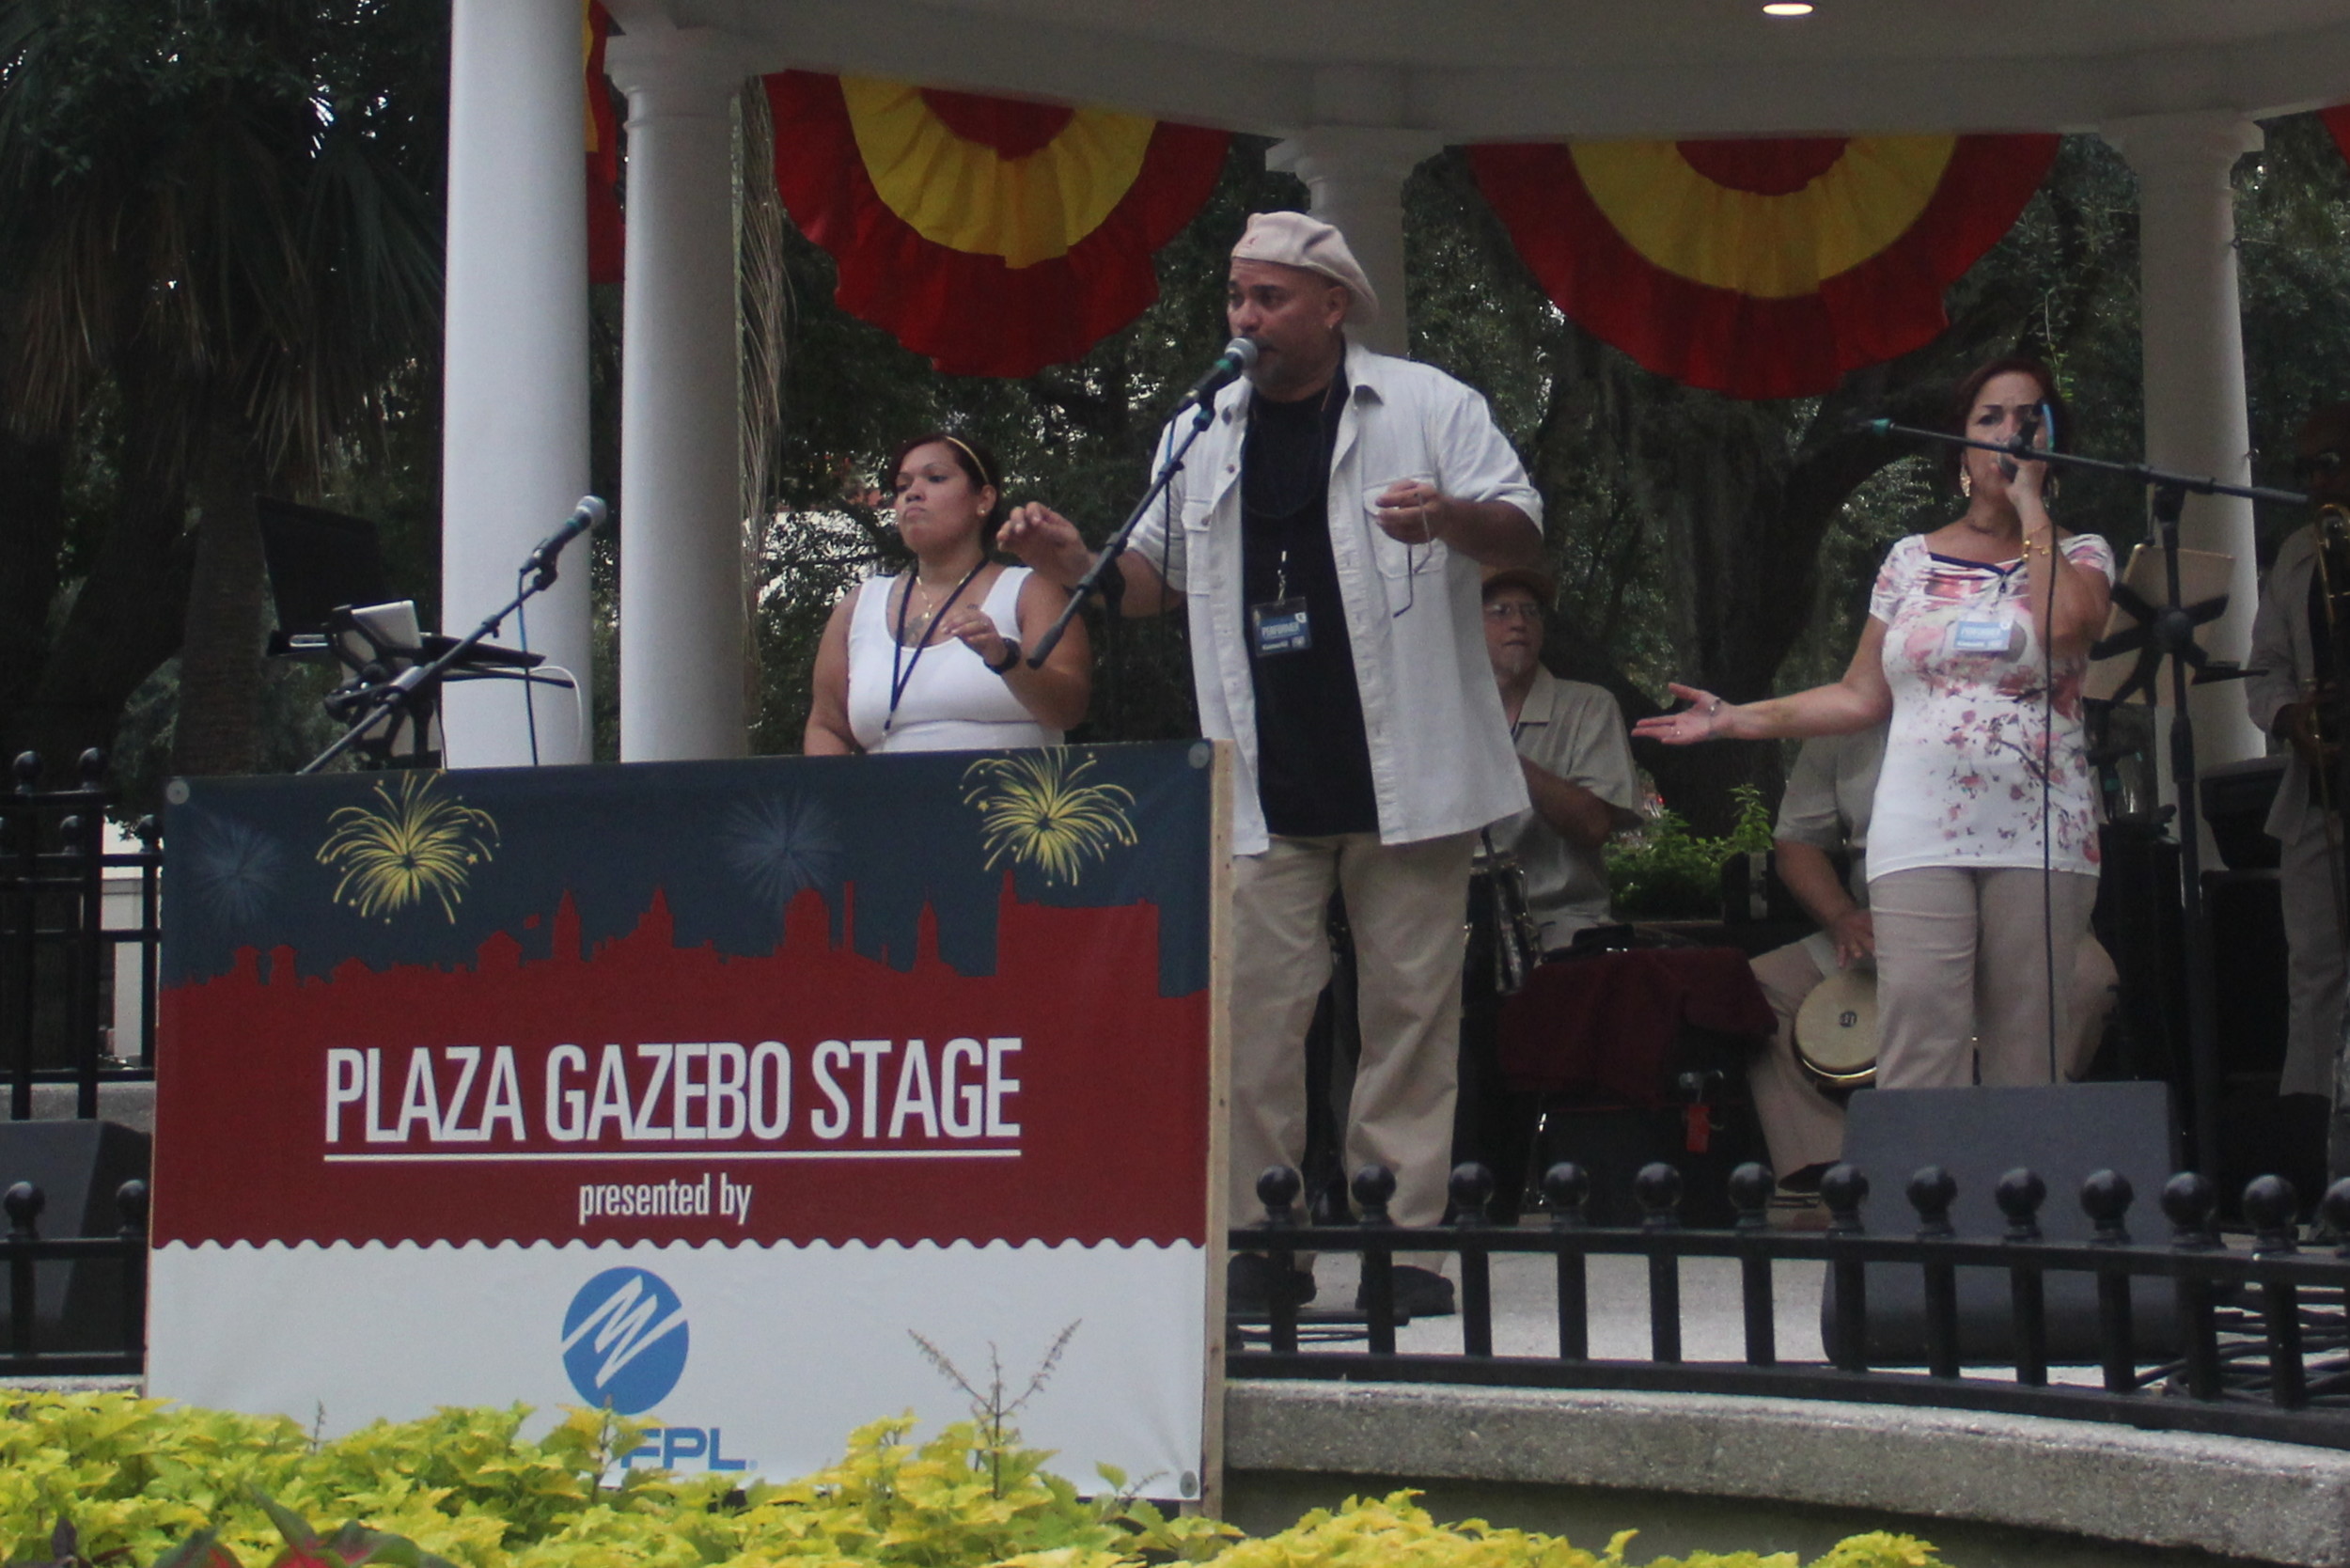 There were several smaller stages and concerts going on during St. Augustine’s 450th Anniversary Celebration. El Conjunto Tropical performs on the Plaza Gazebo stage.